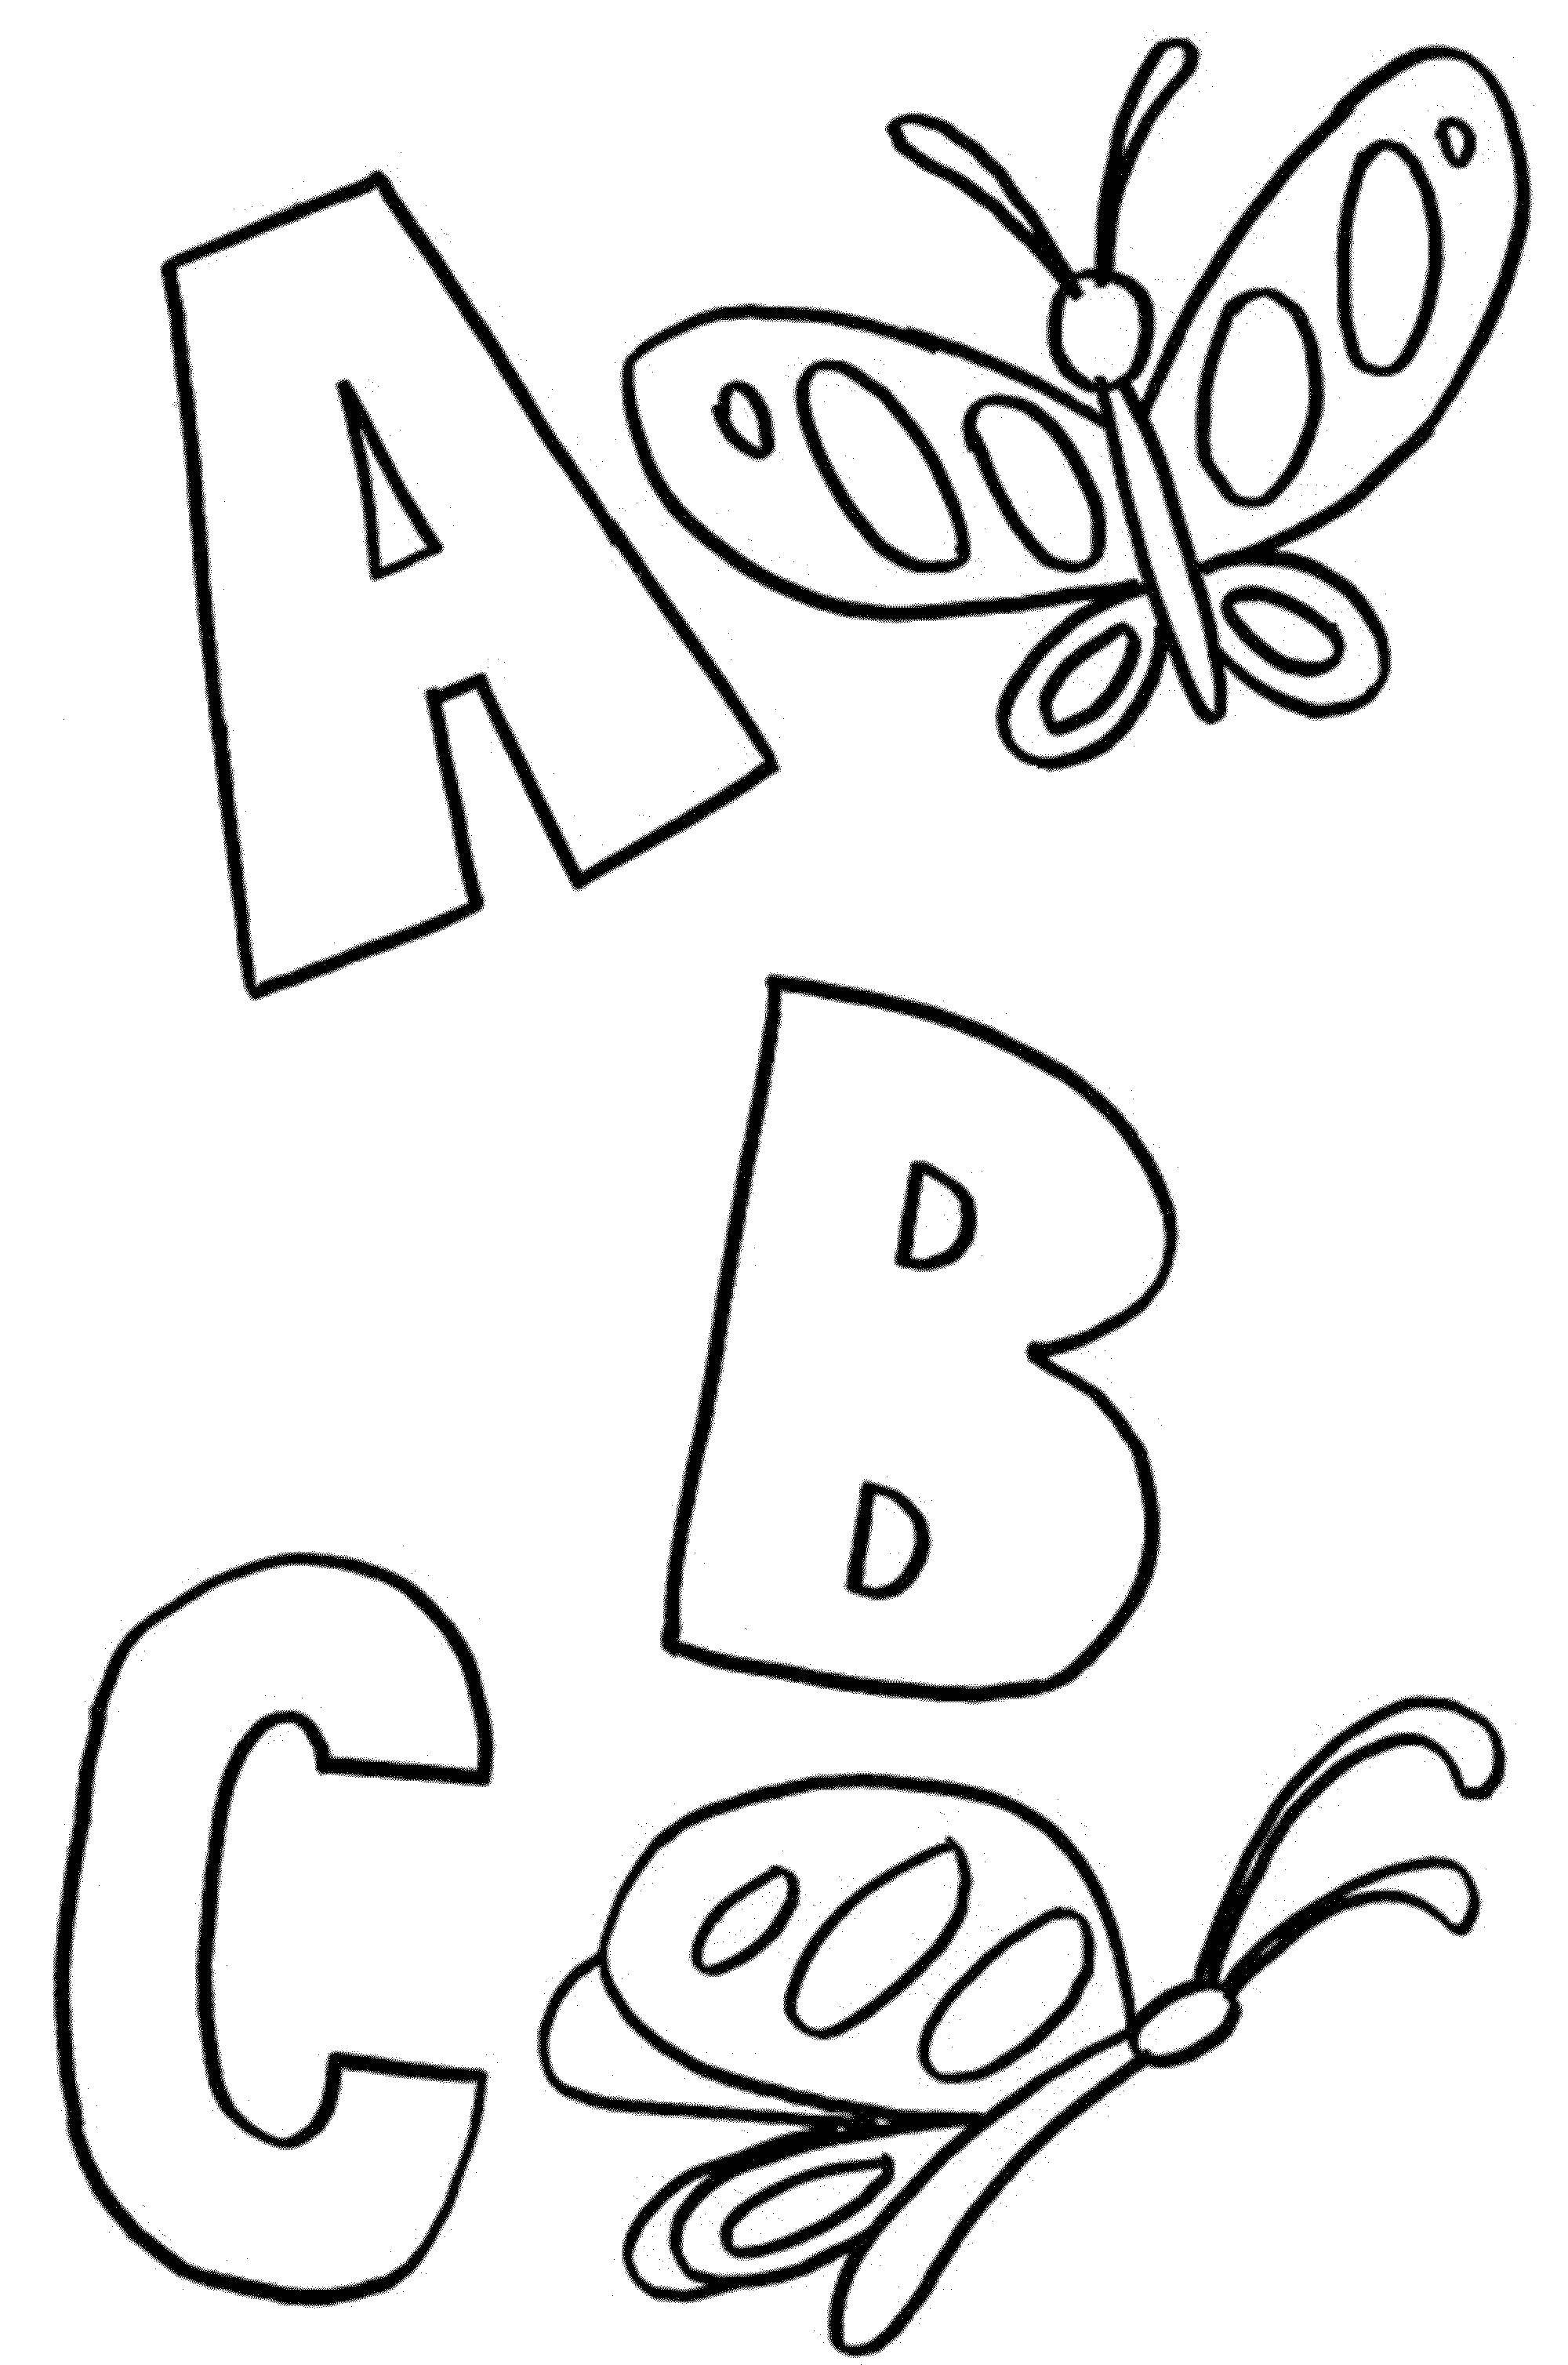 Coloring A, b, c. Category English alphabet. Tags:  The alphabet, letters, words.